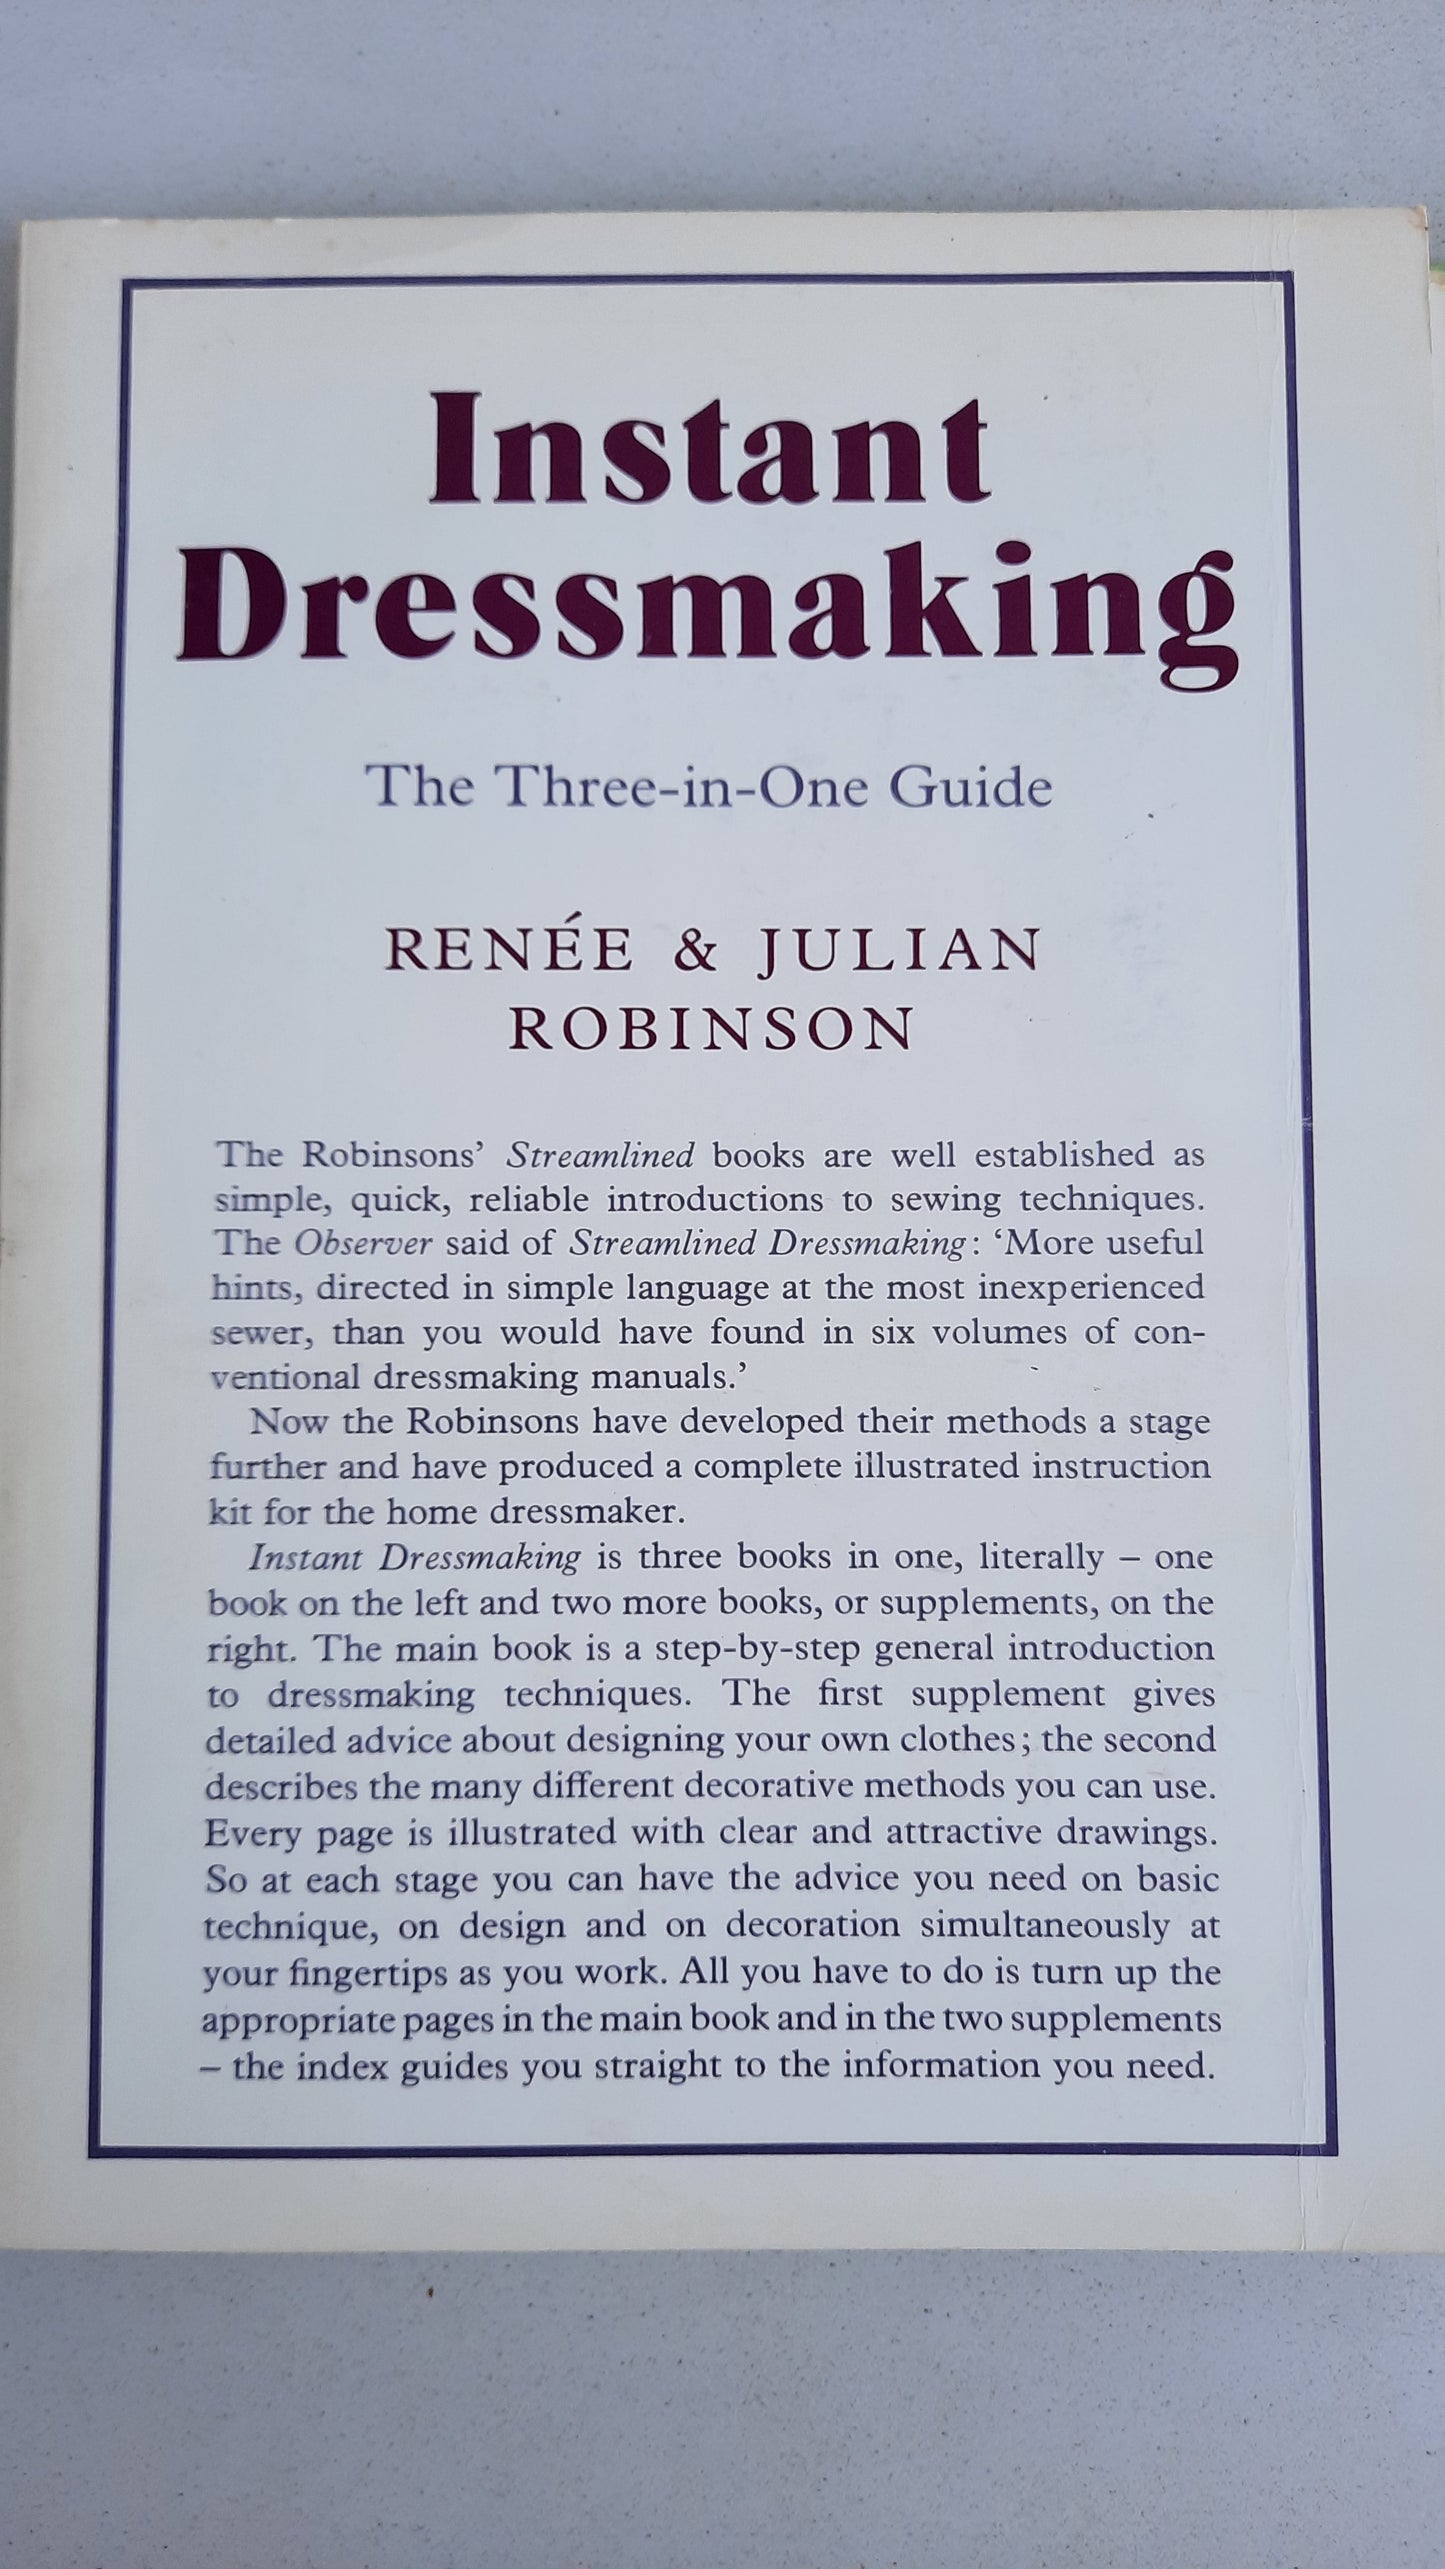 "Instant Dressmaking: The Three-in-one Guide" 1973 by Renee & Julian Robinson